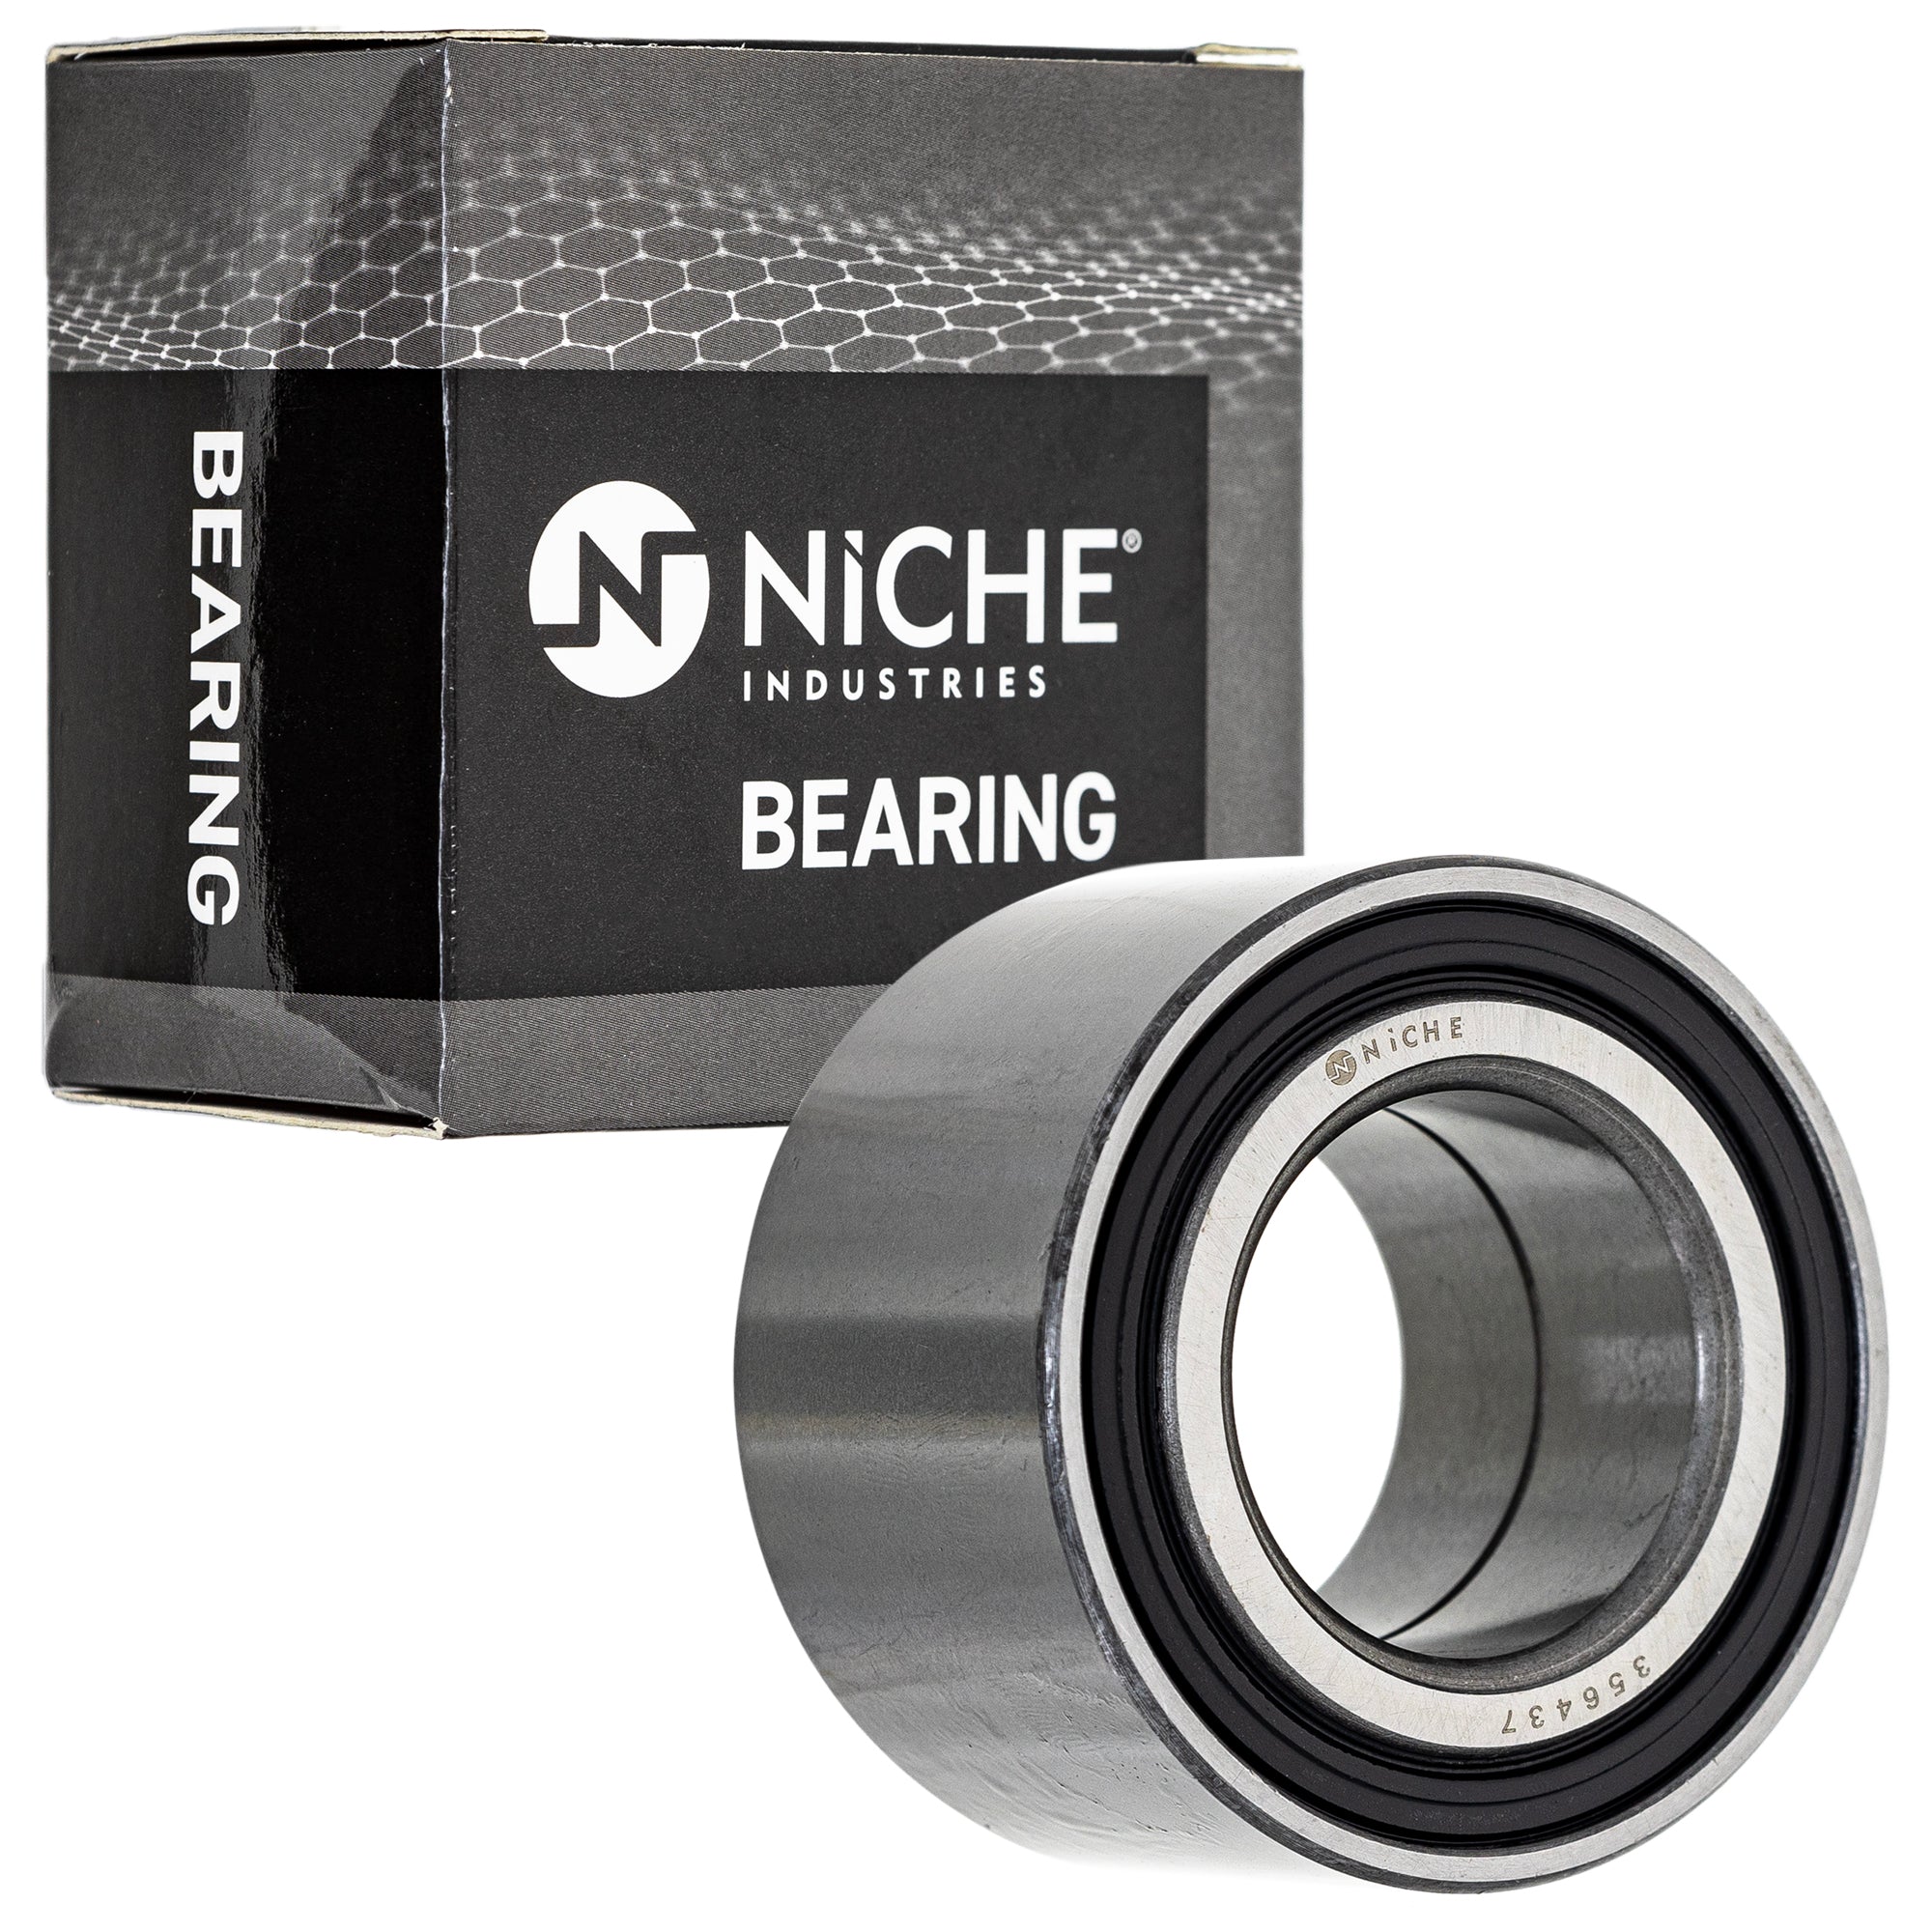 NICHE 519-CBB2283R Bearing 2-Pack for zOTHER GEM Xpedition Trail